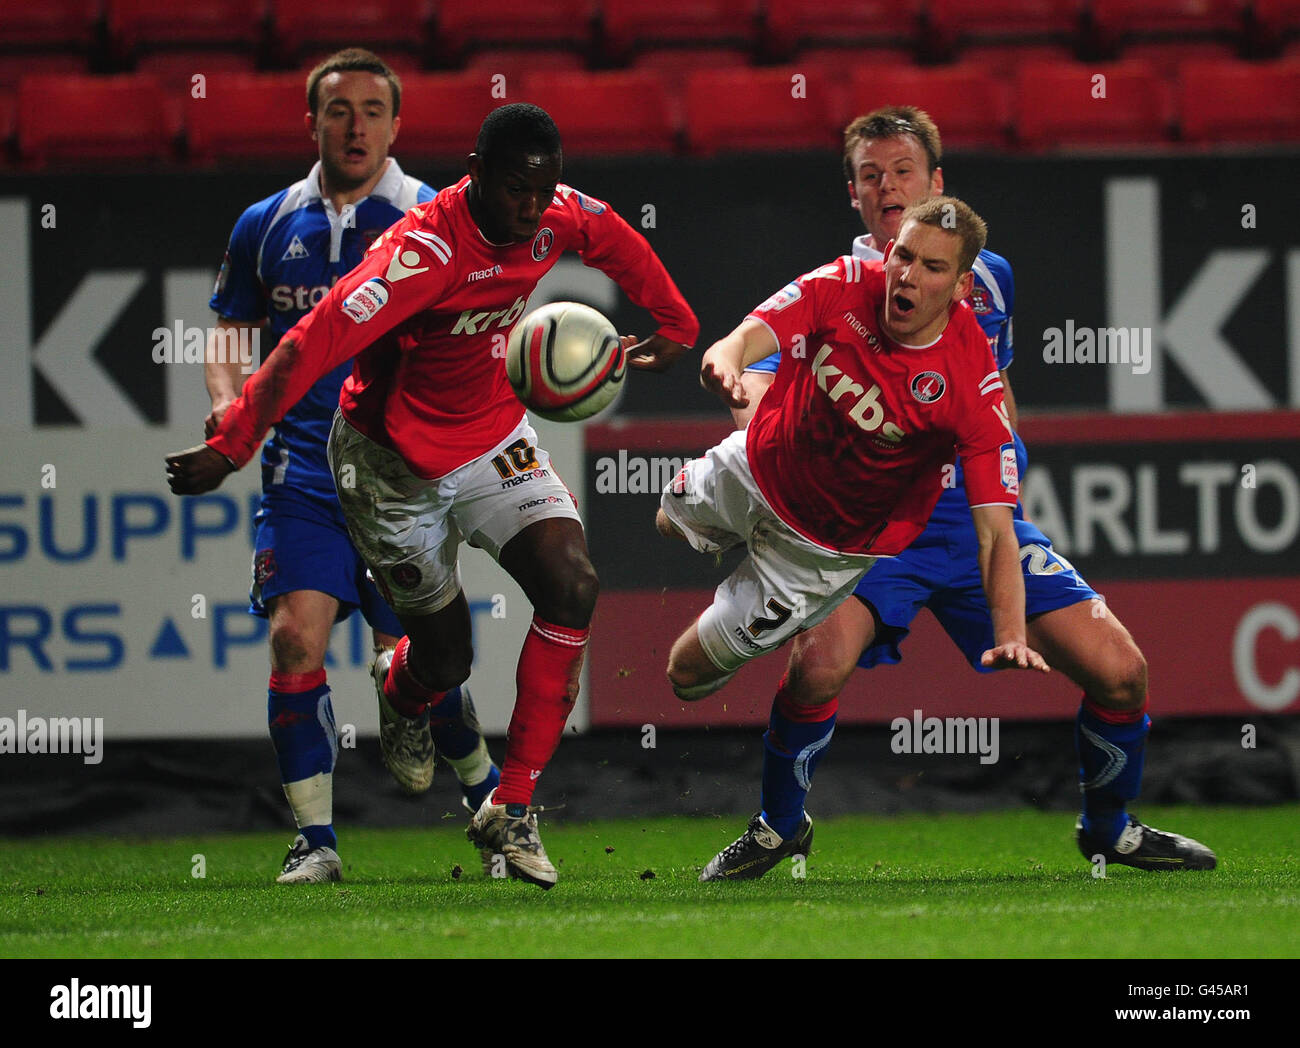 Soccer - npower Football League One - Charlton Athletic v Carlisle United - The Valley. Charlton Athletic's Bradley Wright-Phillips and Scott Wagstaff battle through the Carlisle United's defence Stock Photo